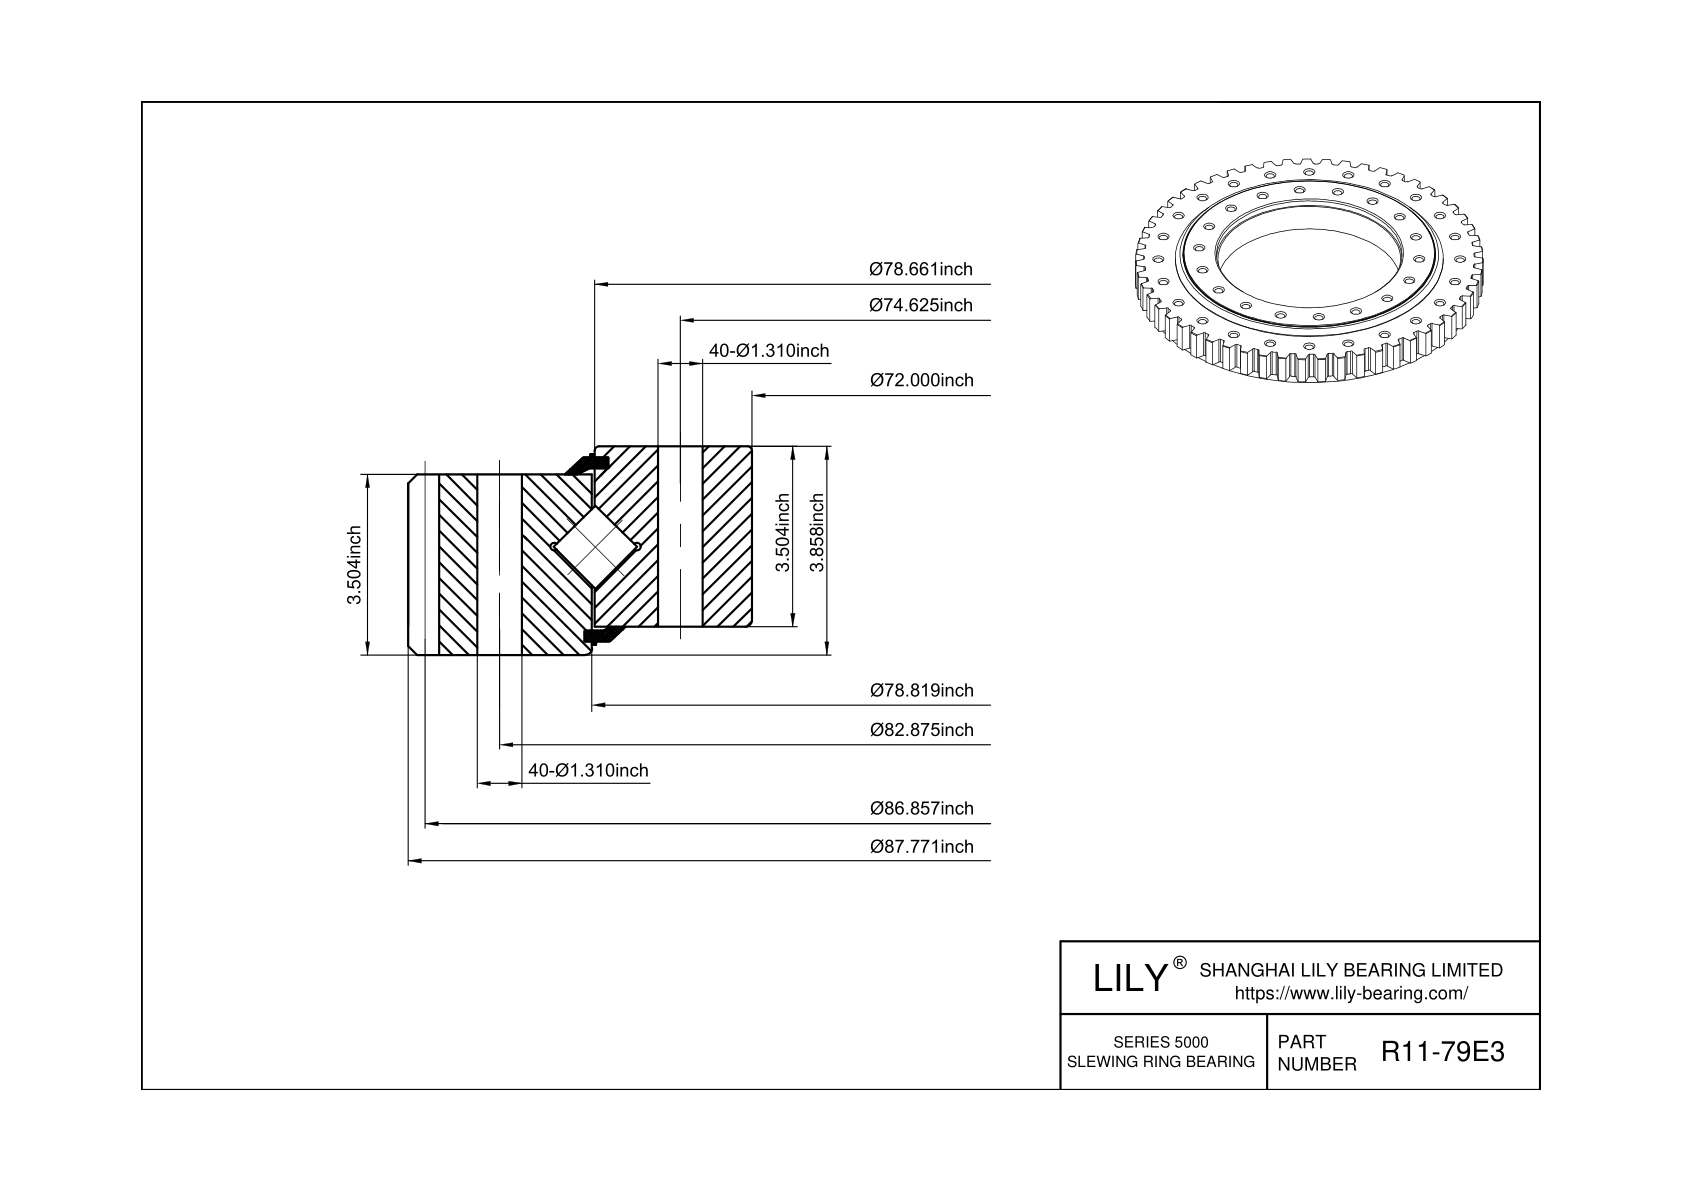 R11-79E3 Cross Roller Slewing Ring Bearing cad drawing